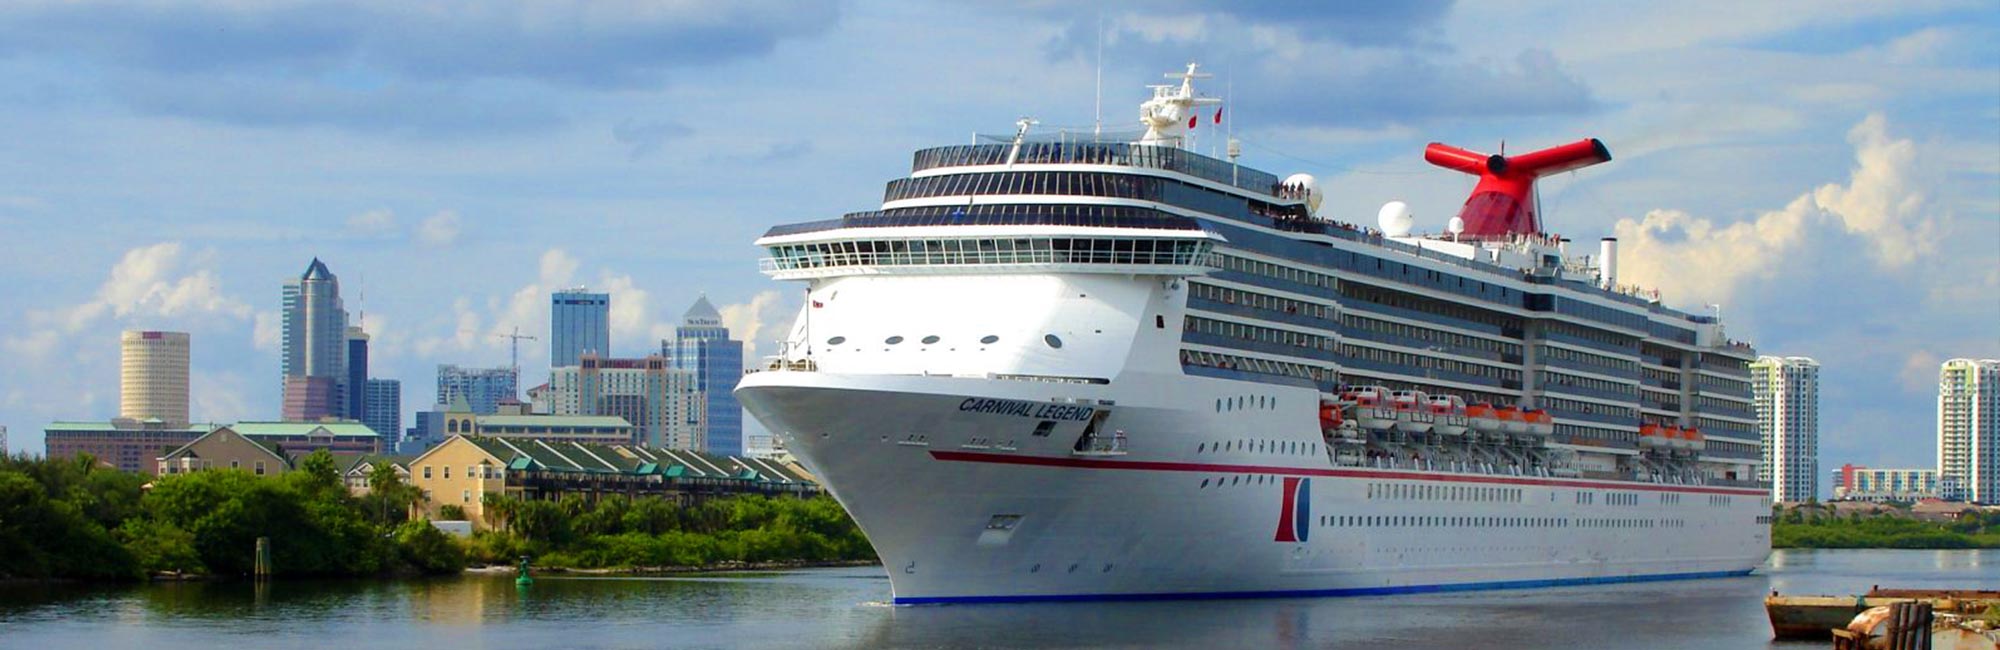 tampa cruise port with cruise ship - the barrymore hotel - hotels near tampa cruise port